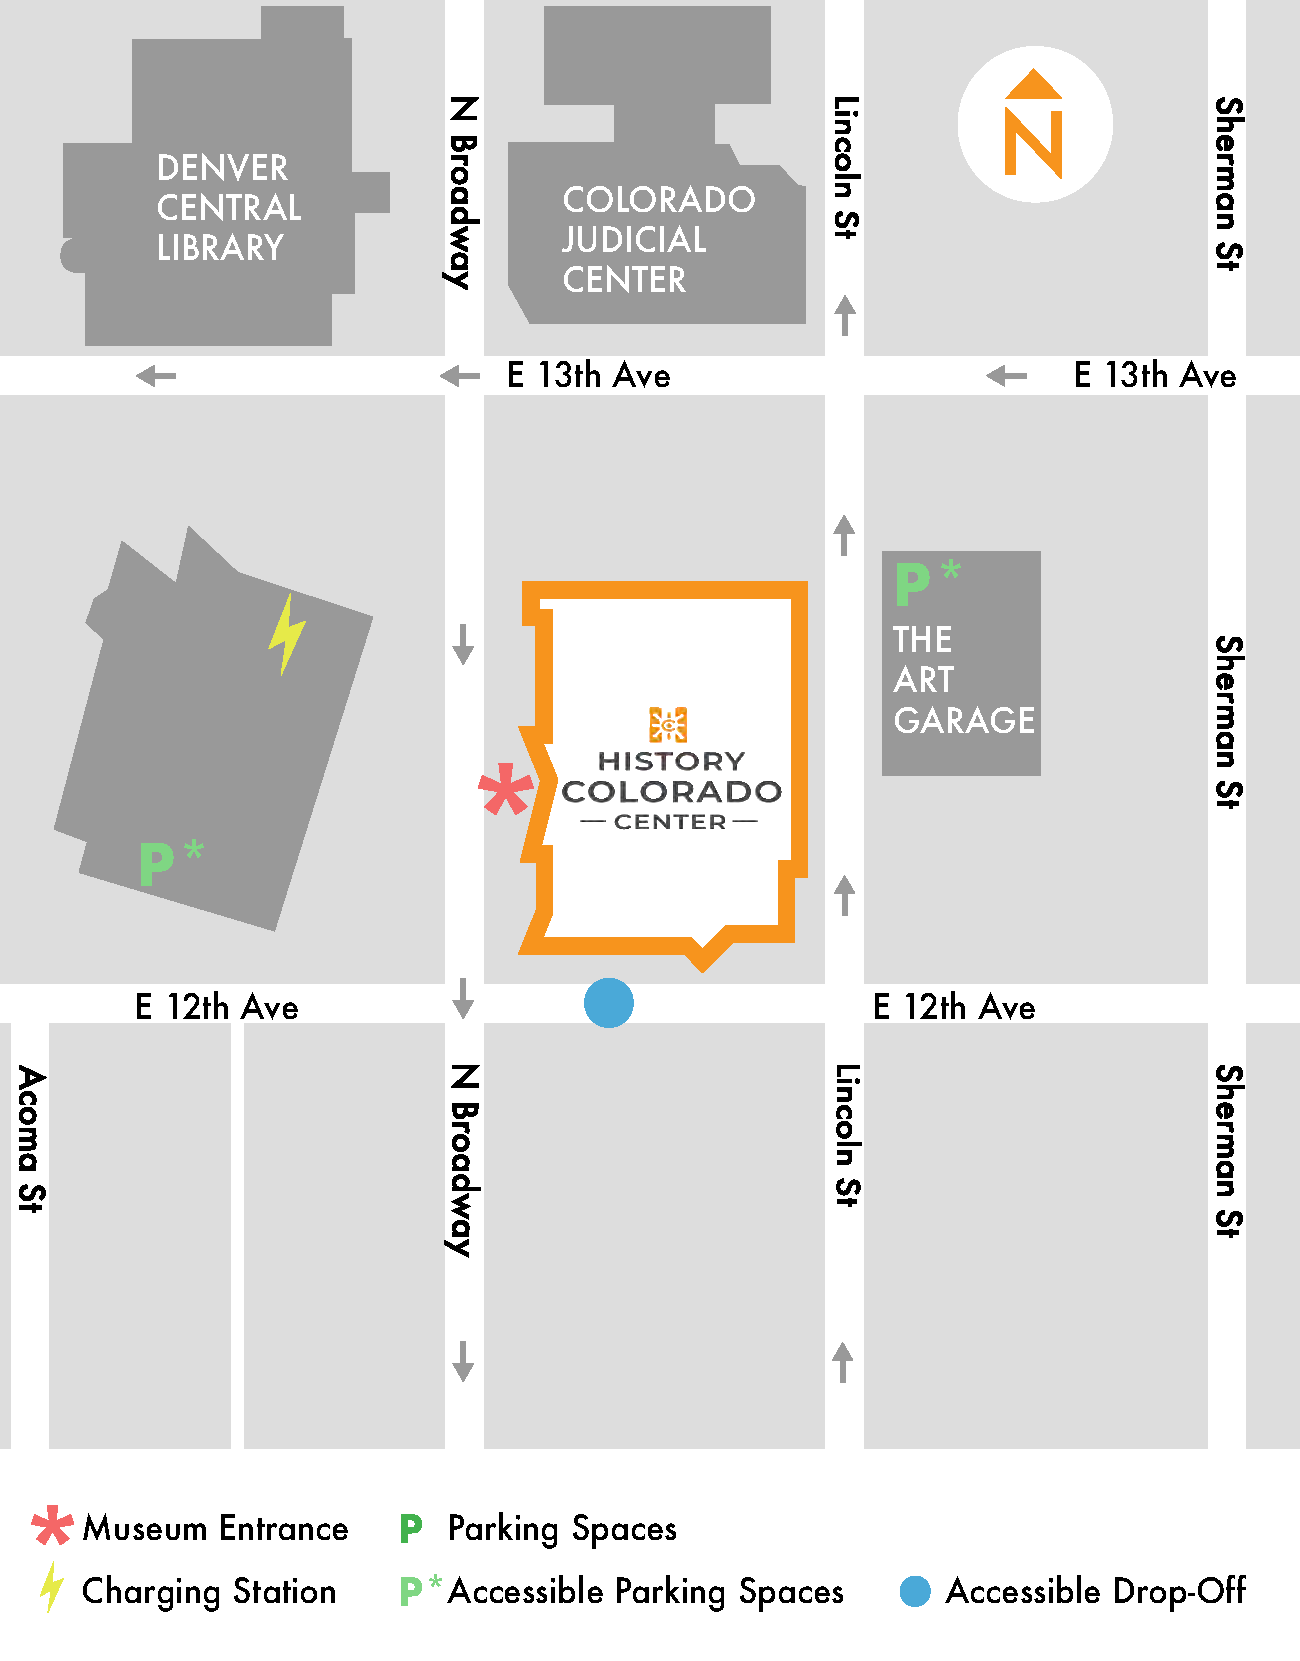 A map of the area around the History Colorado Center, showing the museum entrance on North Broadway, the accessible drop off on East 12th Avenue, and parking at the Art Garage on Lincoln Street.